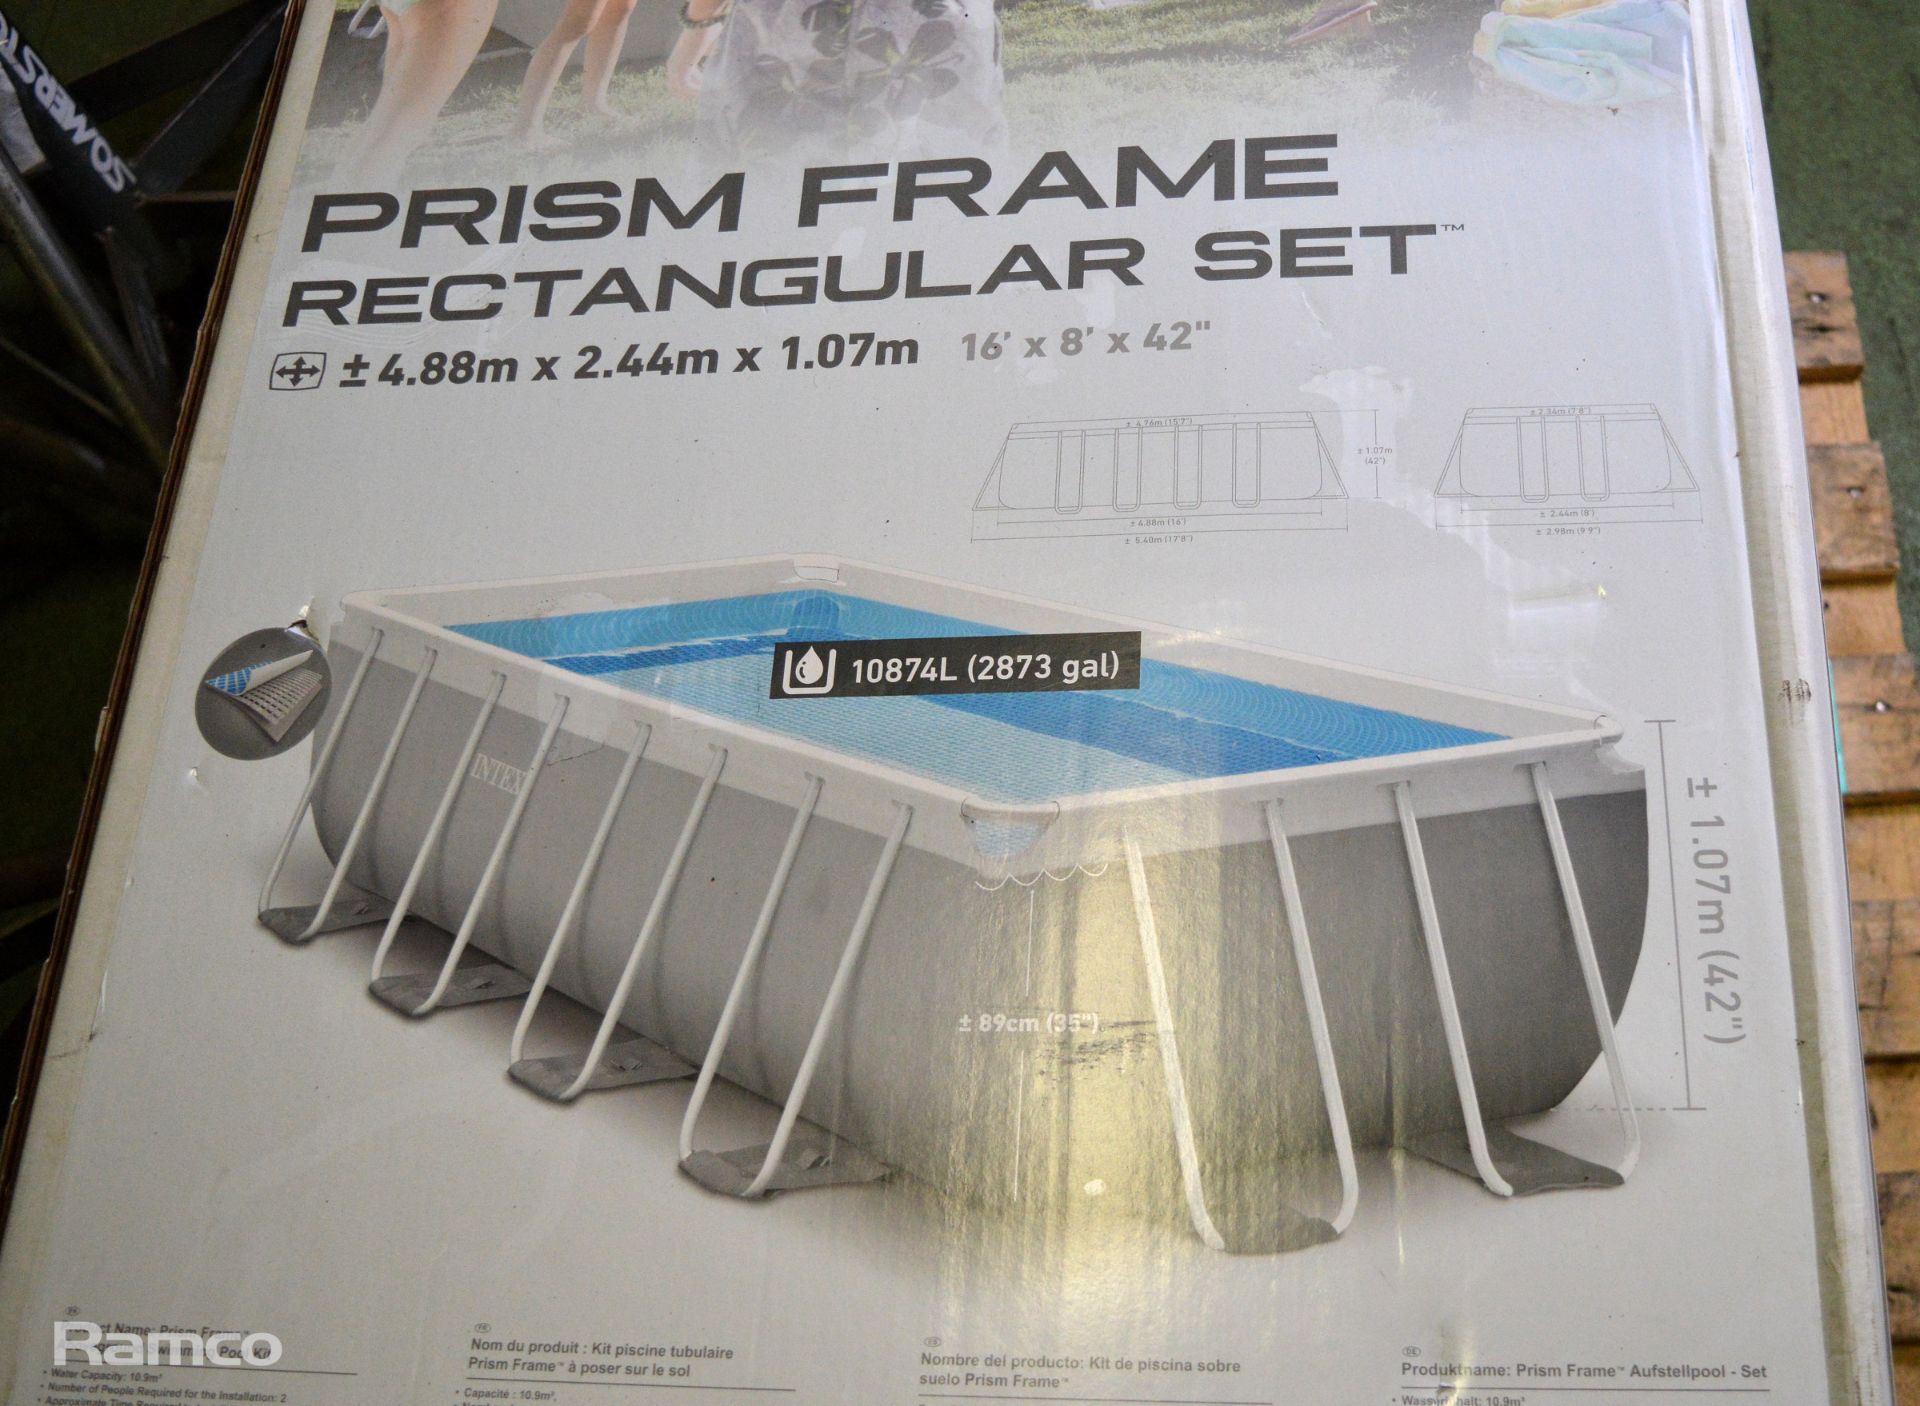 Intex Prism Frame Swimming Pool L 4860mm x W 2430mm x H 1070mm (when inflated) - Image 2 of 4